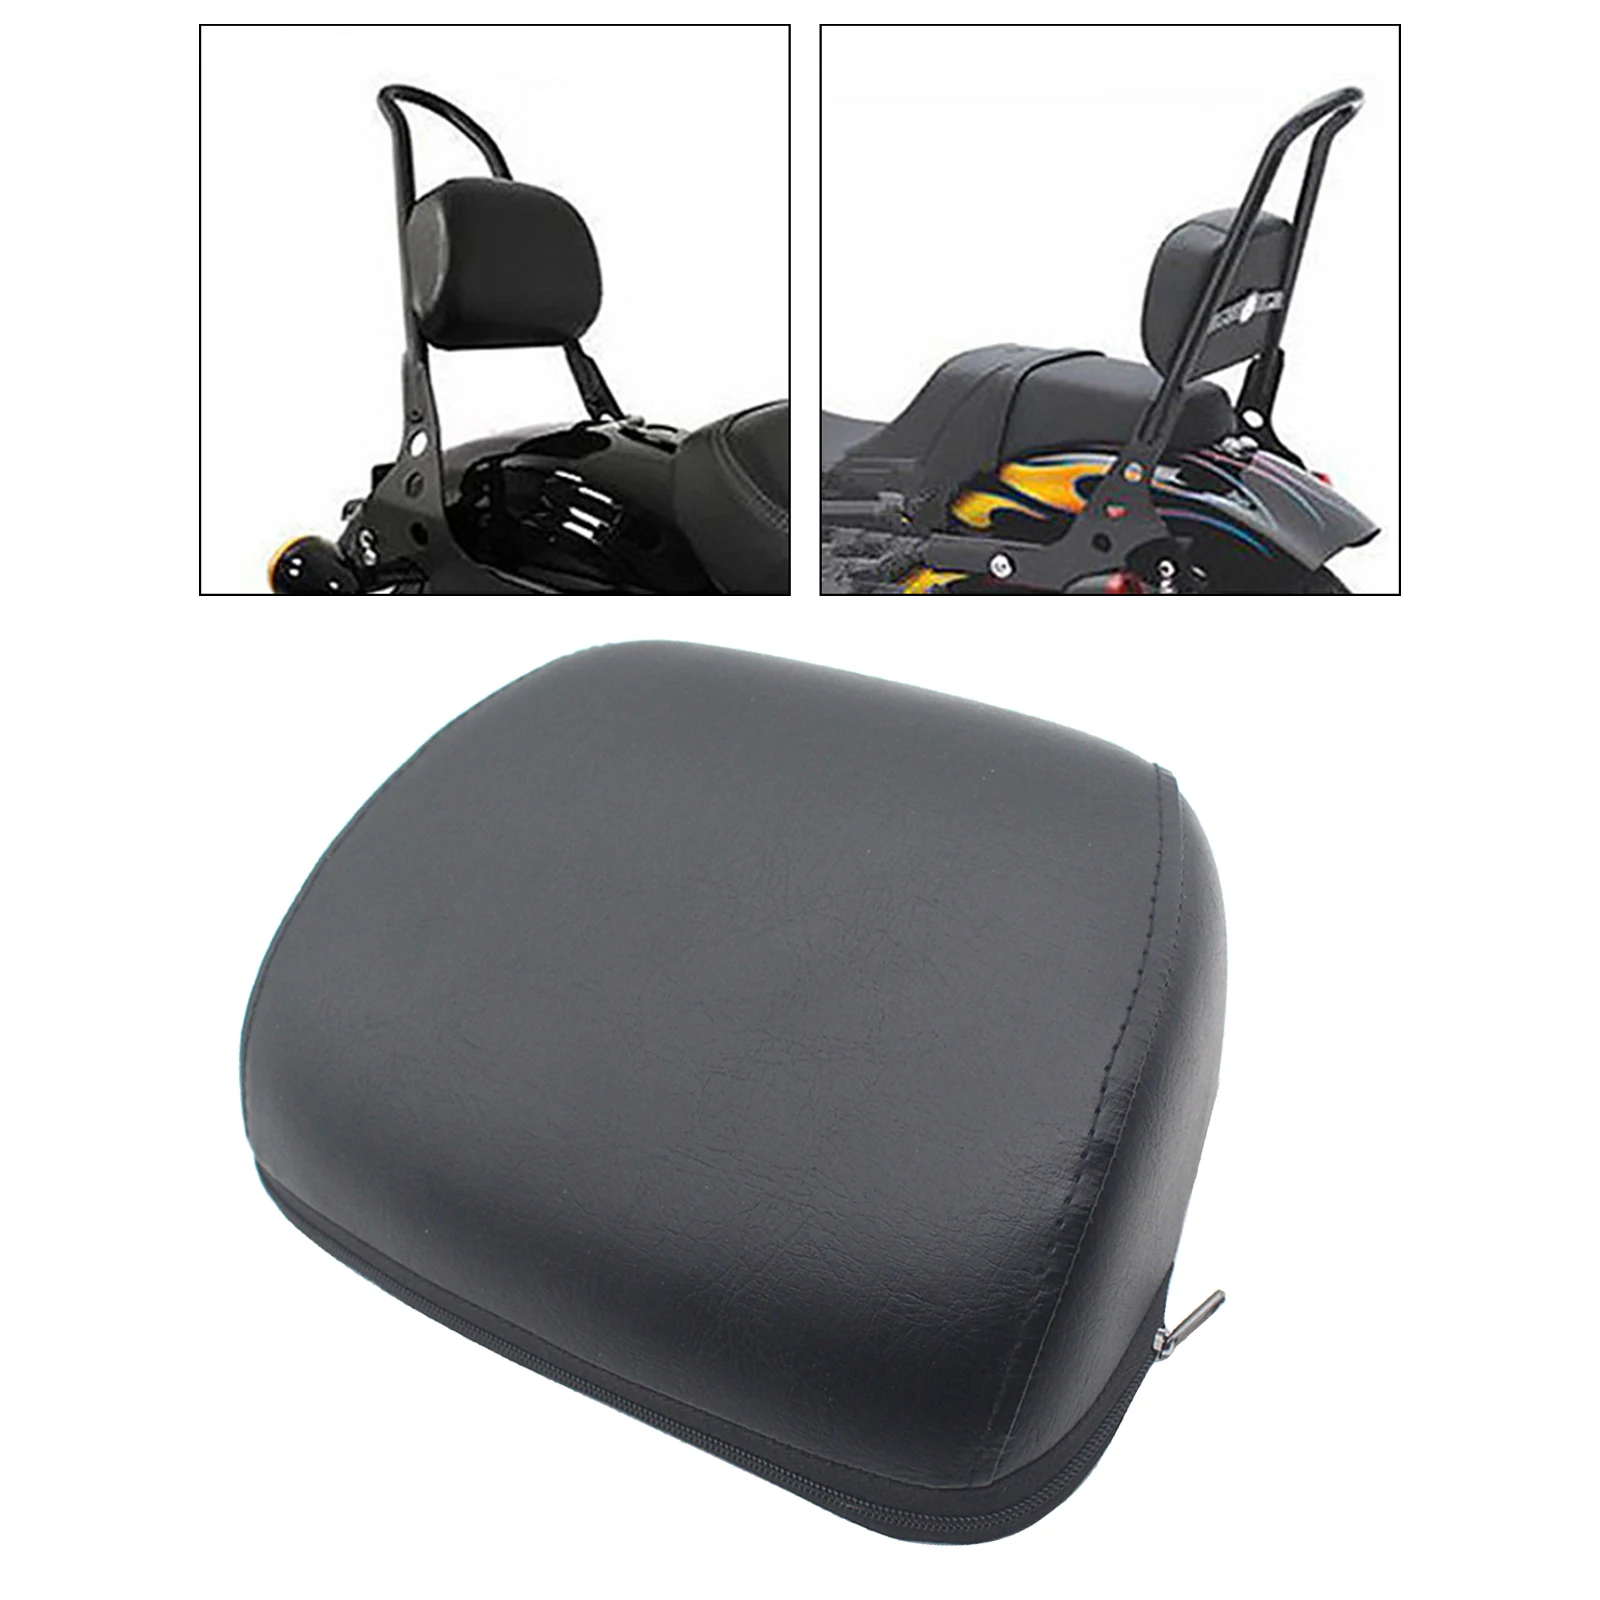 Backrest Pad Passenger Passenger Sissy Bar Detachable for Harley 883 1200 48 Replacement Part Motorcycle Parts